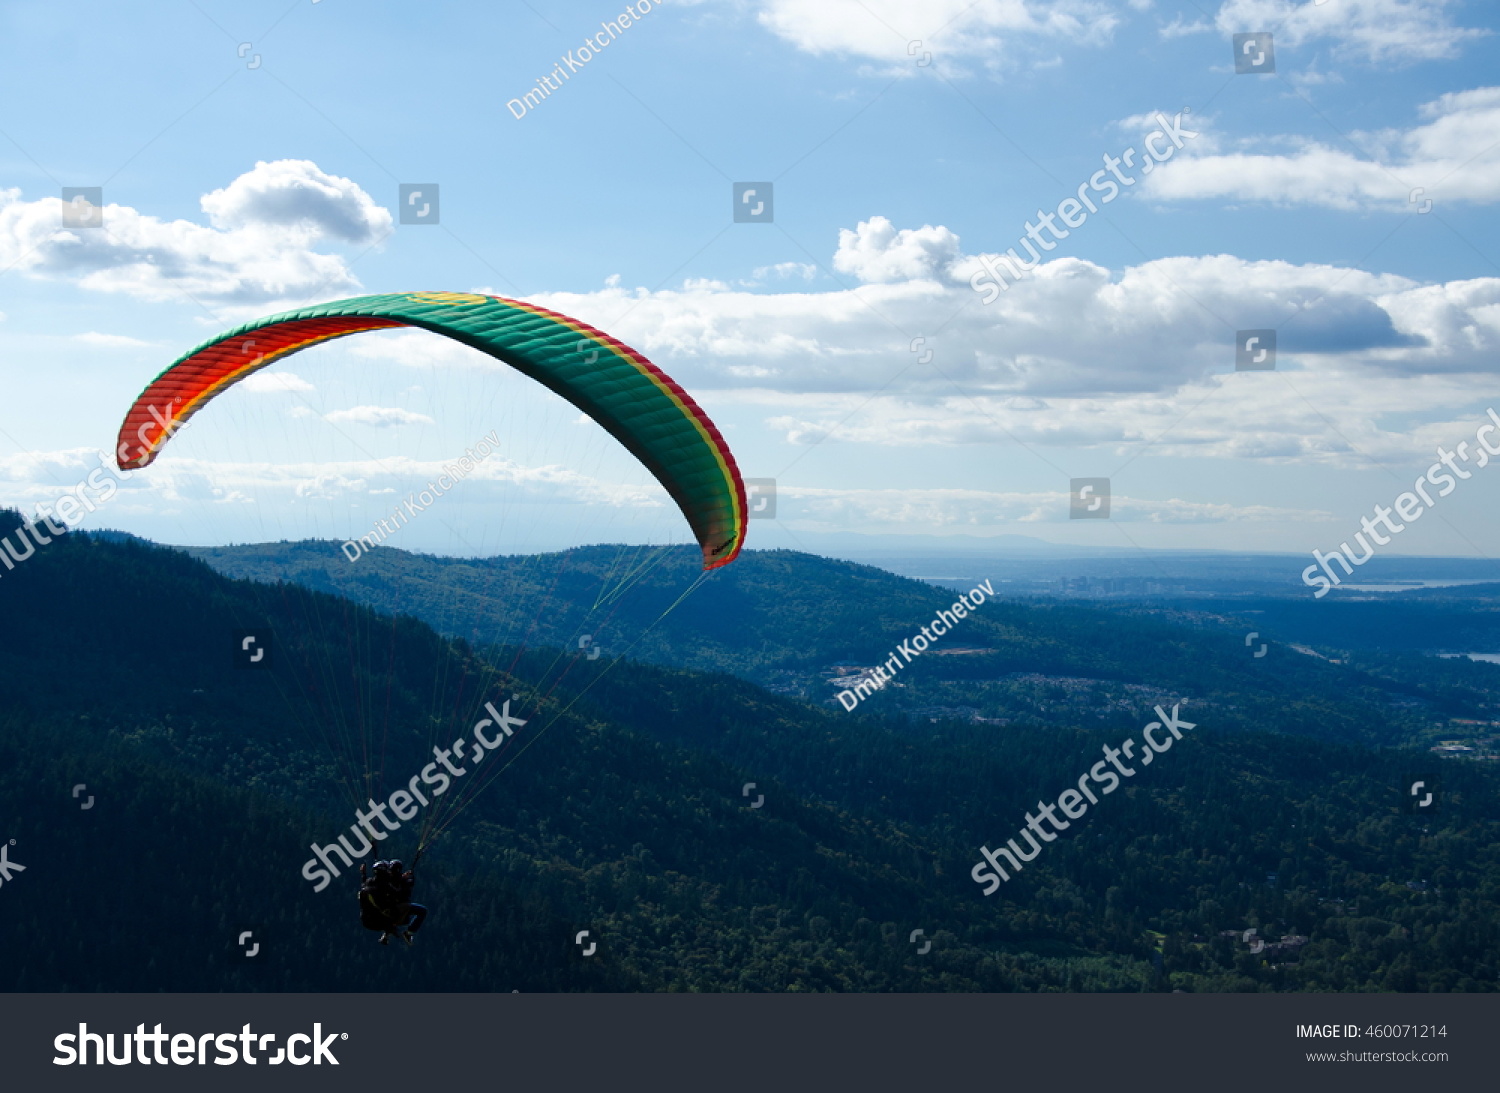 Paragliding Near Tiger Mountain State Forest Stock Photo ...